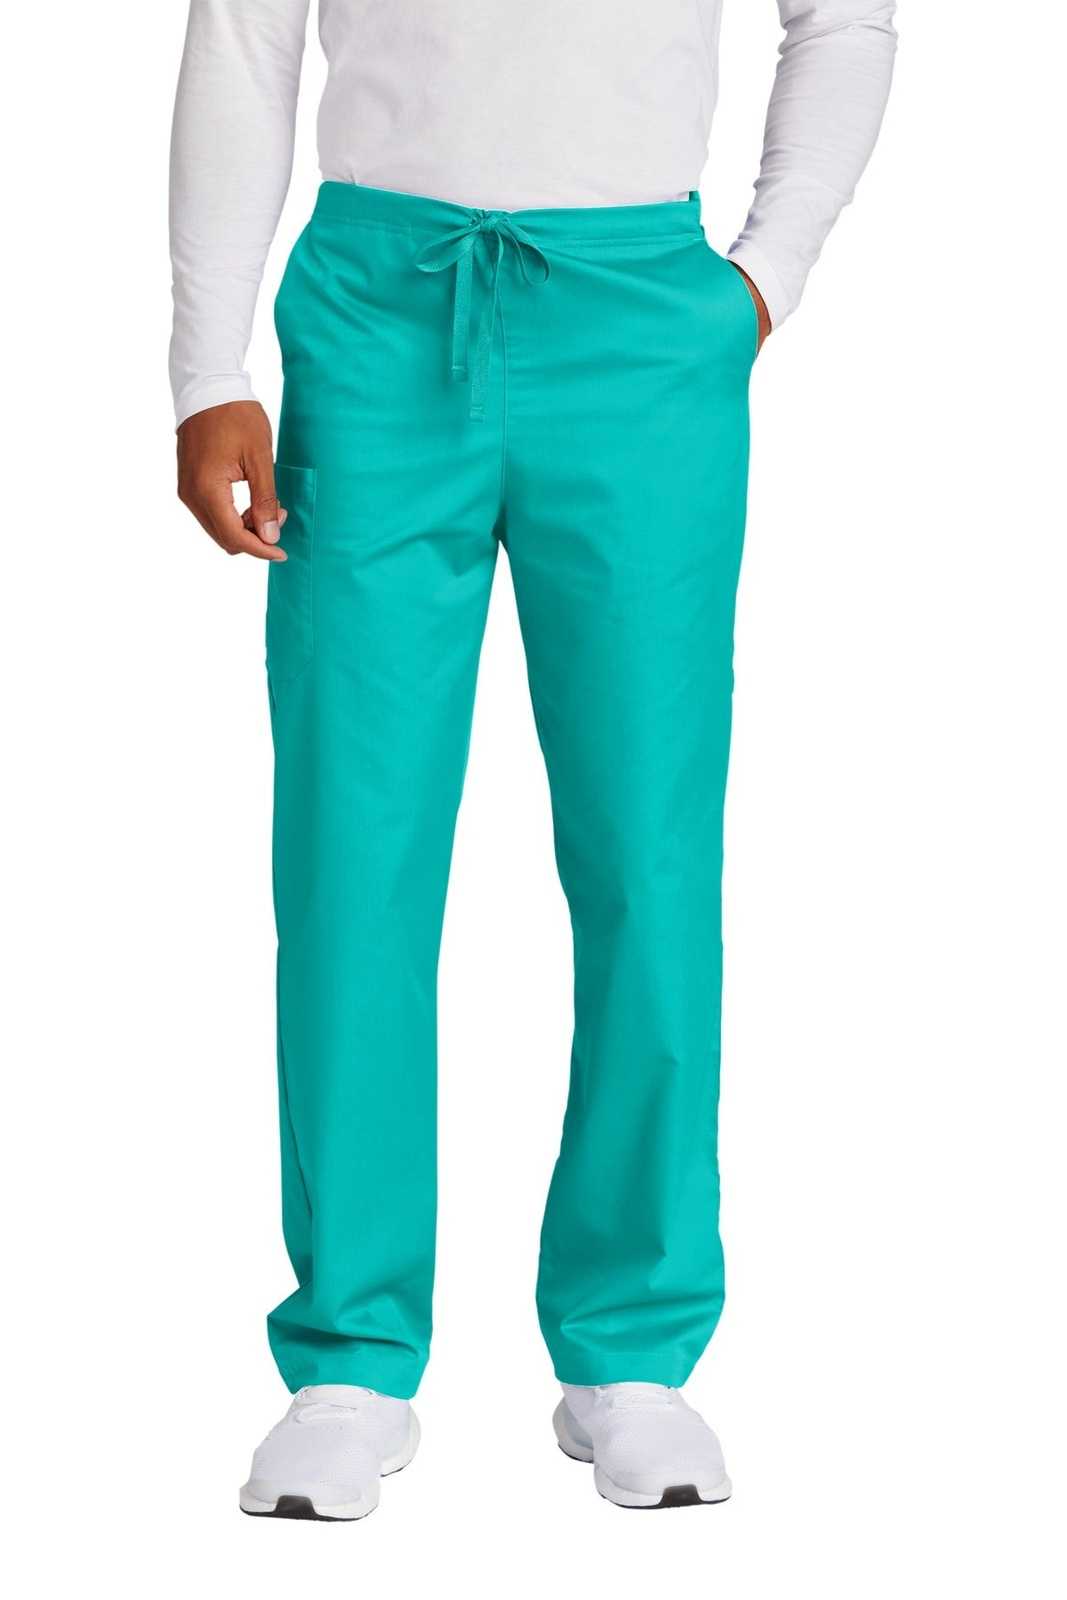 Wonderwink WW3150T Unisex Tall WorkFlexCargo Pant - Teal Blue - HIT a Double - 1